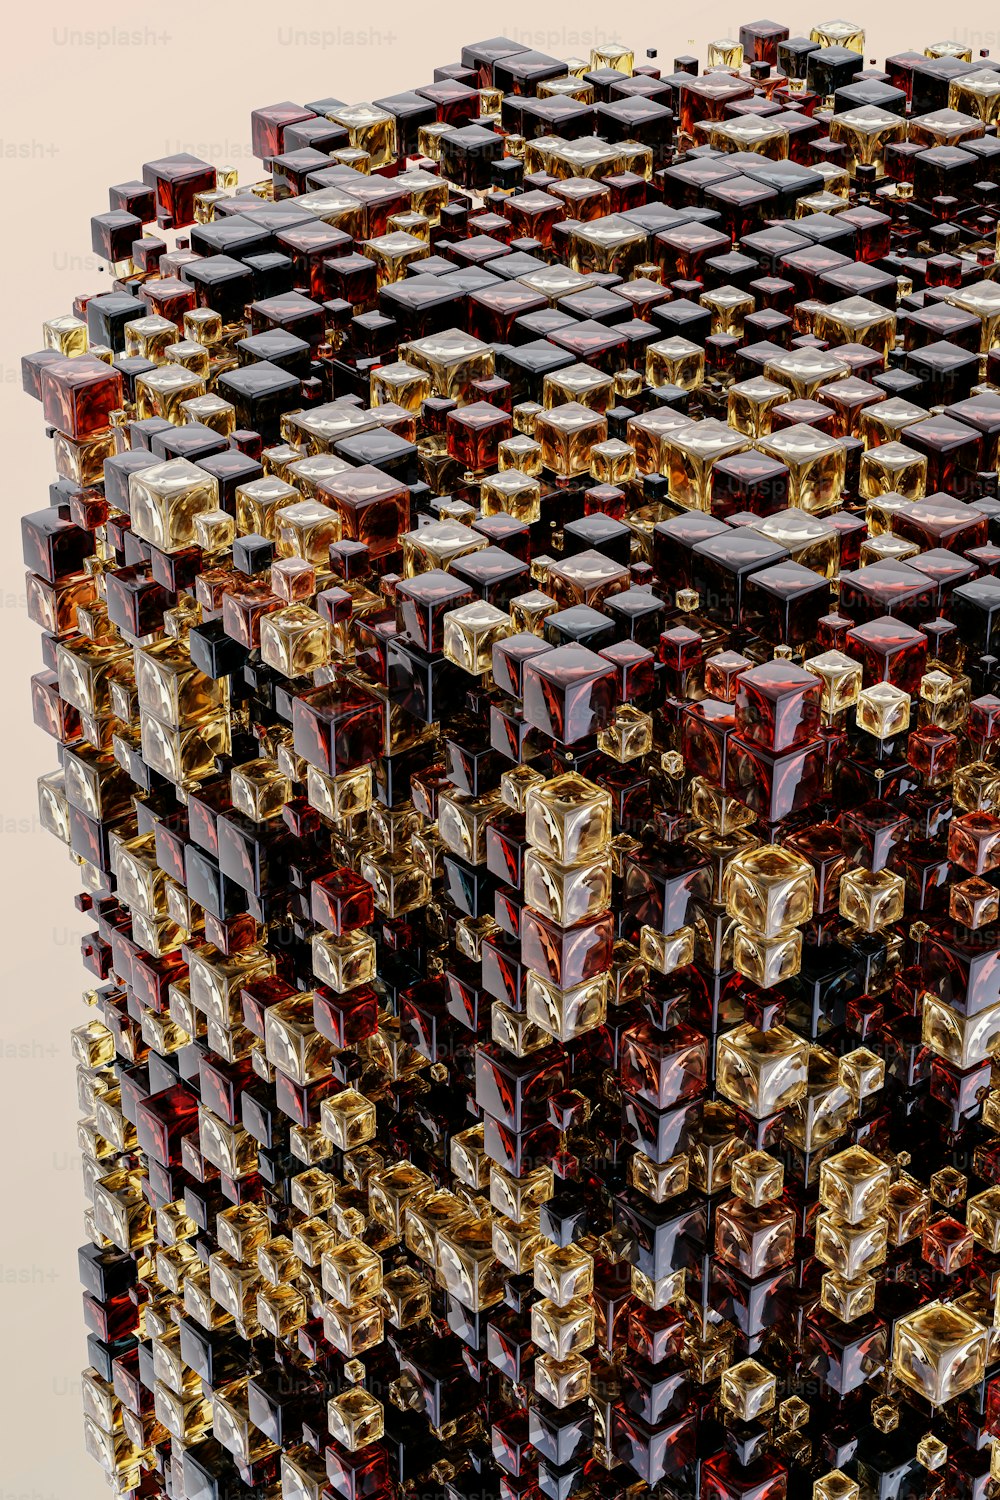 a close up of a very complex object made of cubes